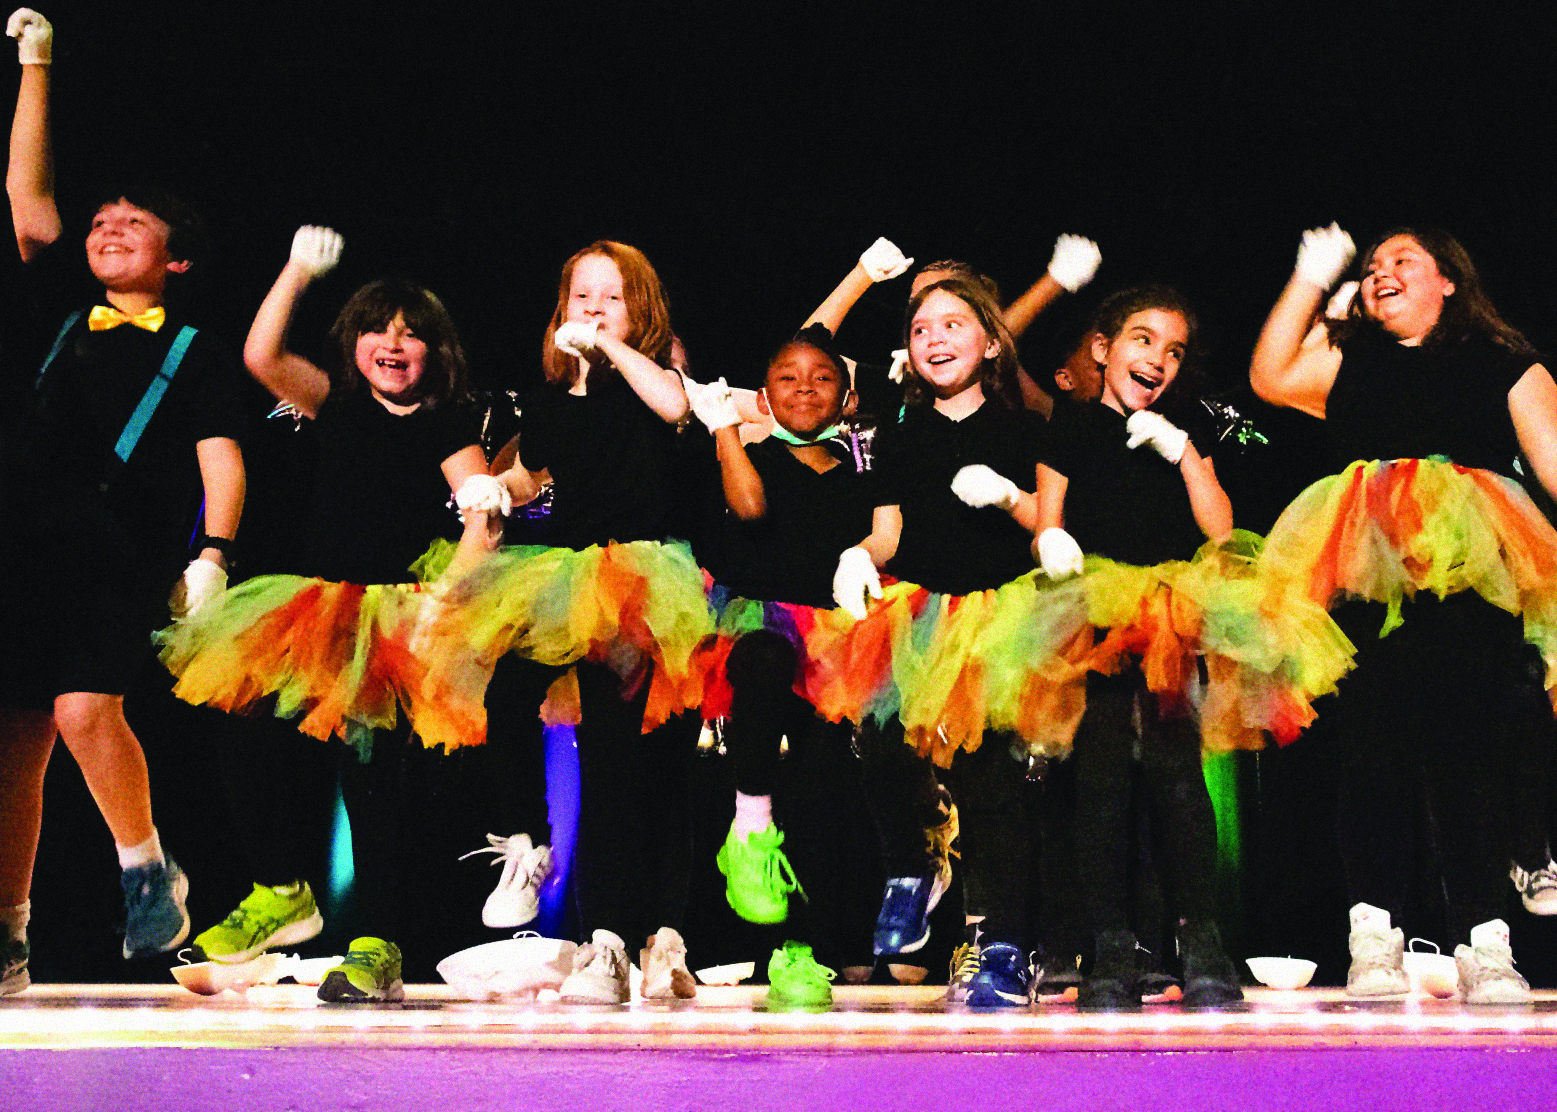 group of students in rainbow tutus dance on stage